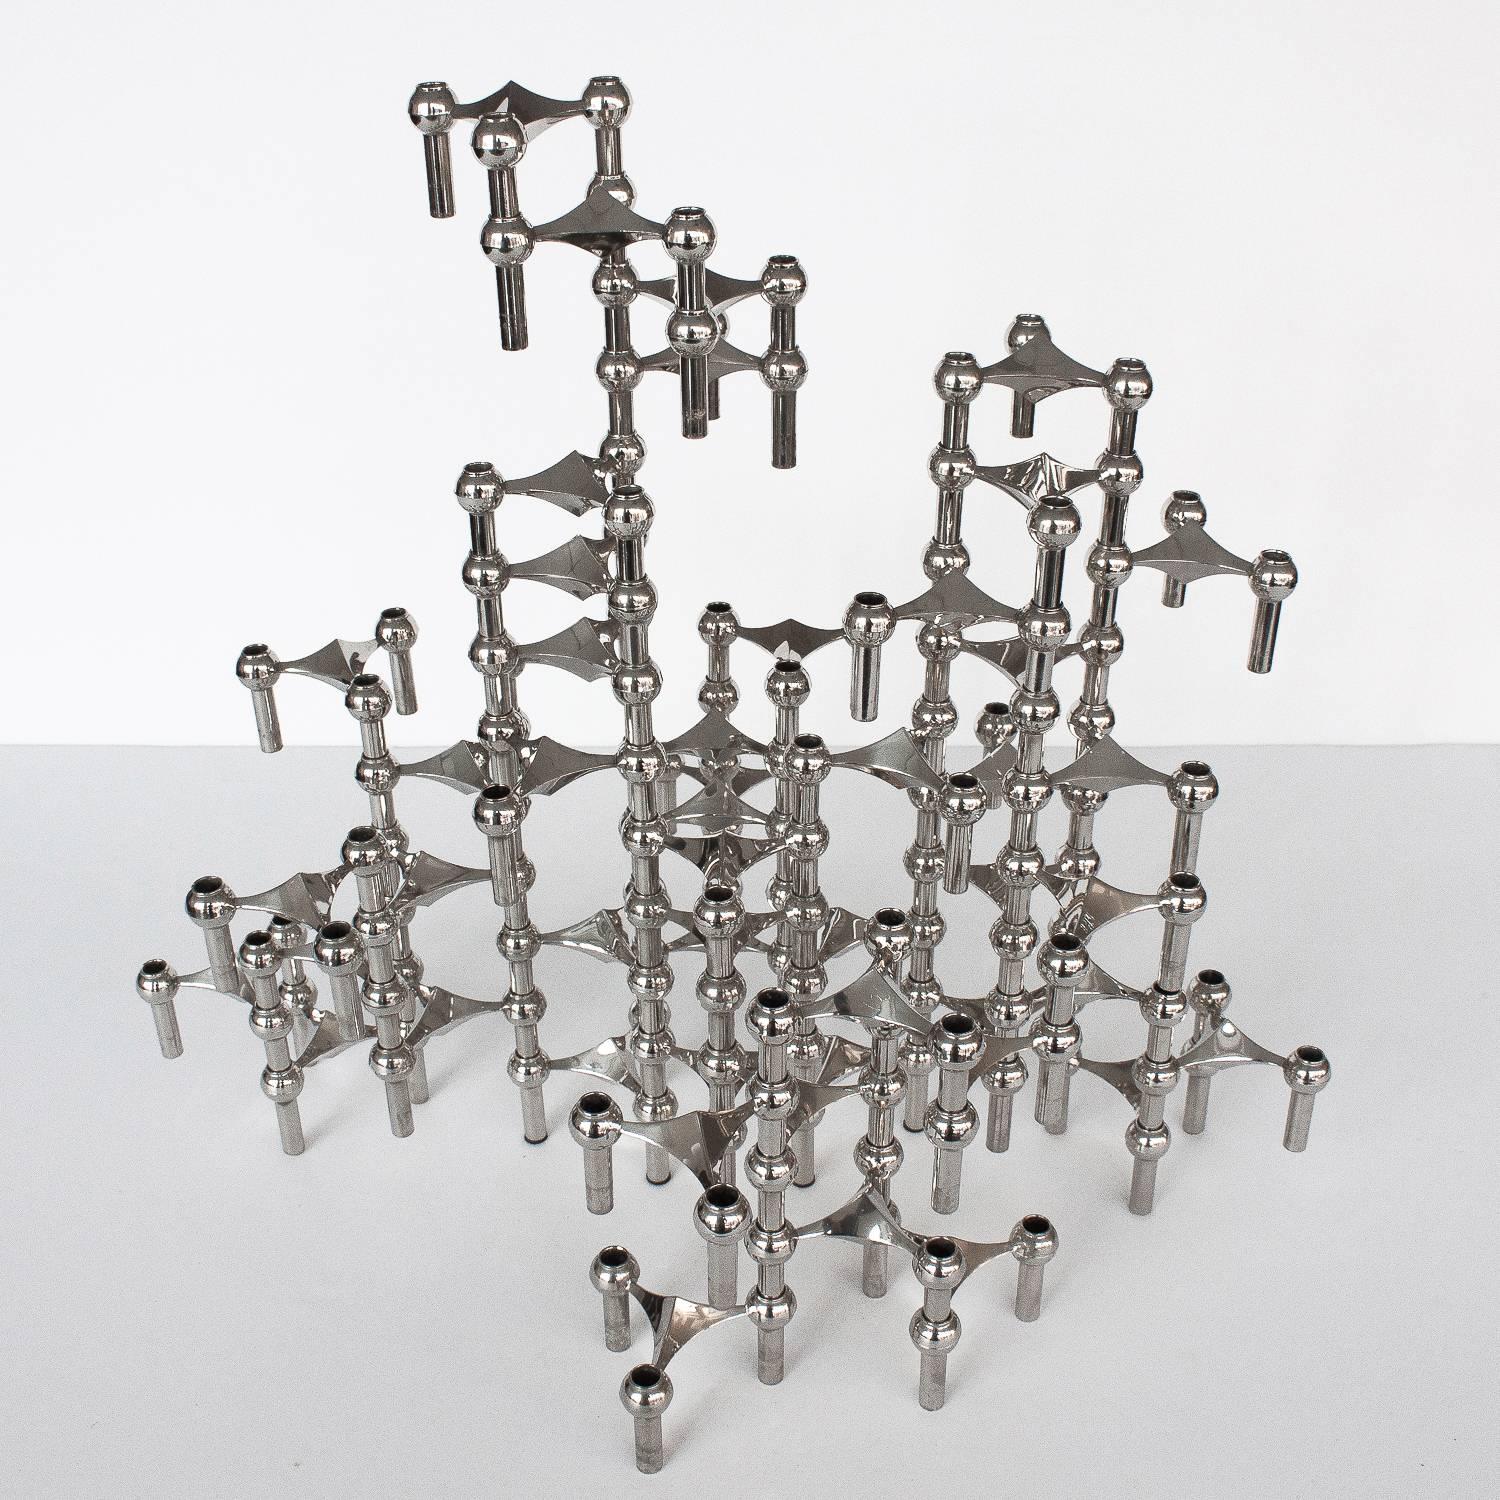 A sculpture made of 50 individual candleholders by Caesar Stoffi and Fritz Nagel for BMF, Germany. This modular design can be configured in an endless number of ways both vertically and horizontally by stacking each interlocking piece. Perfect as a